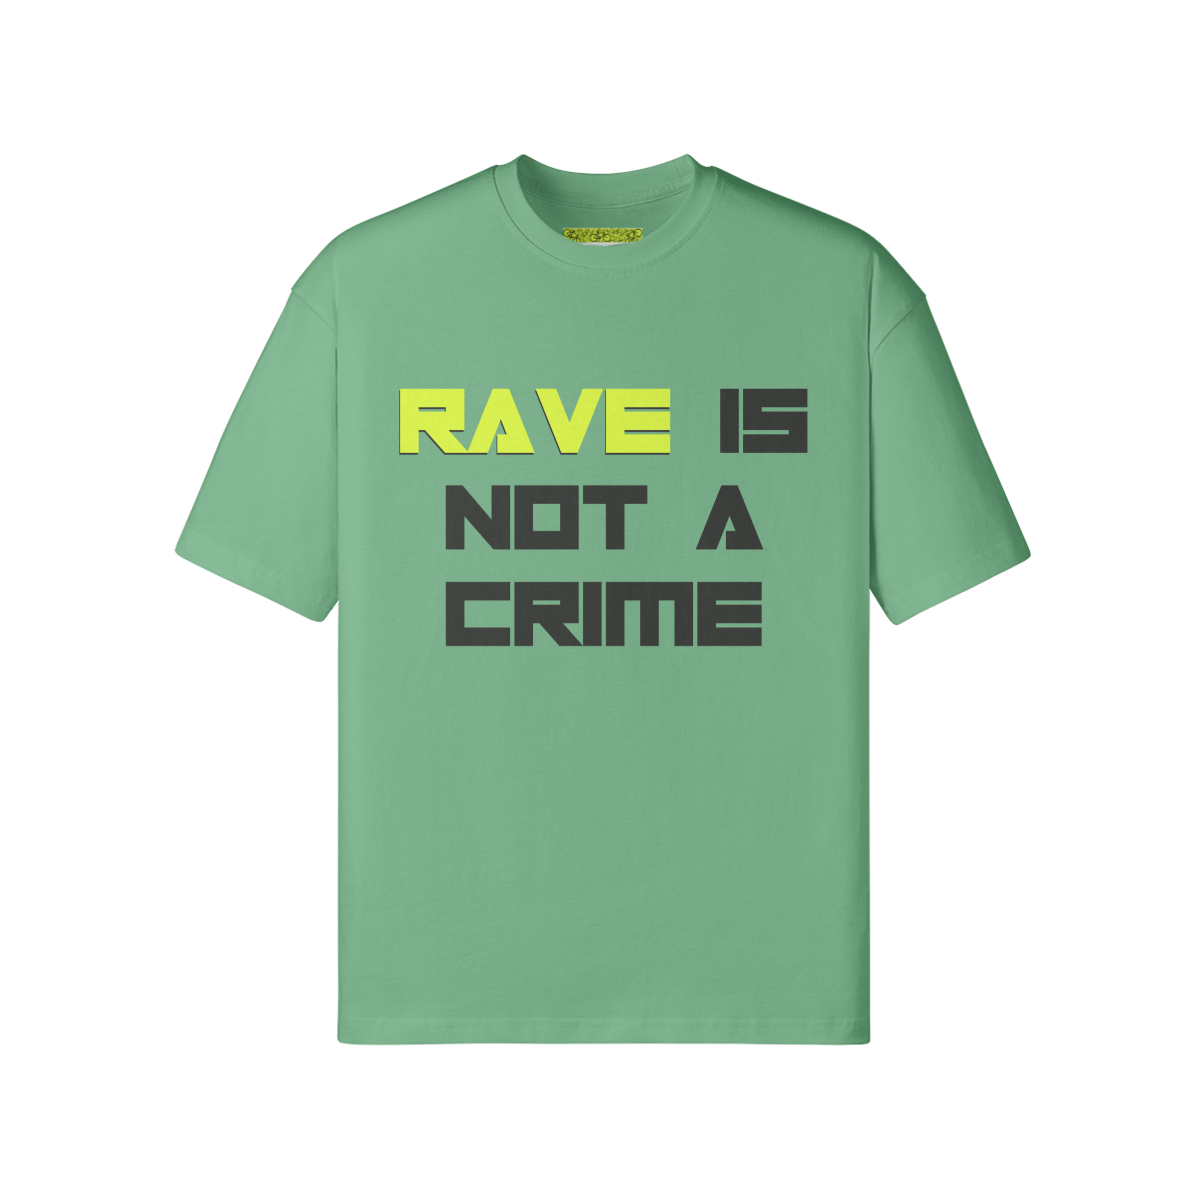 RAVE IS NOT A CRIME - Unisex Loose T-shirt